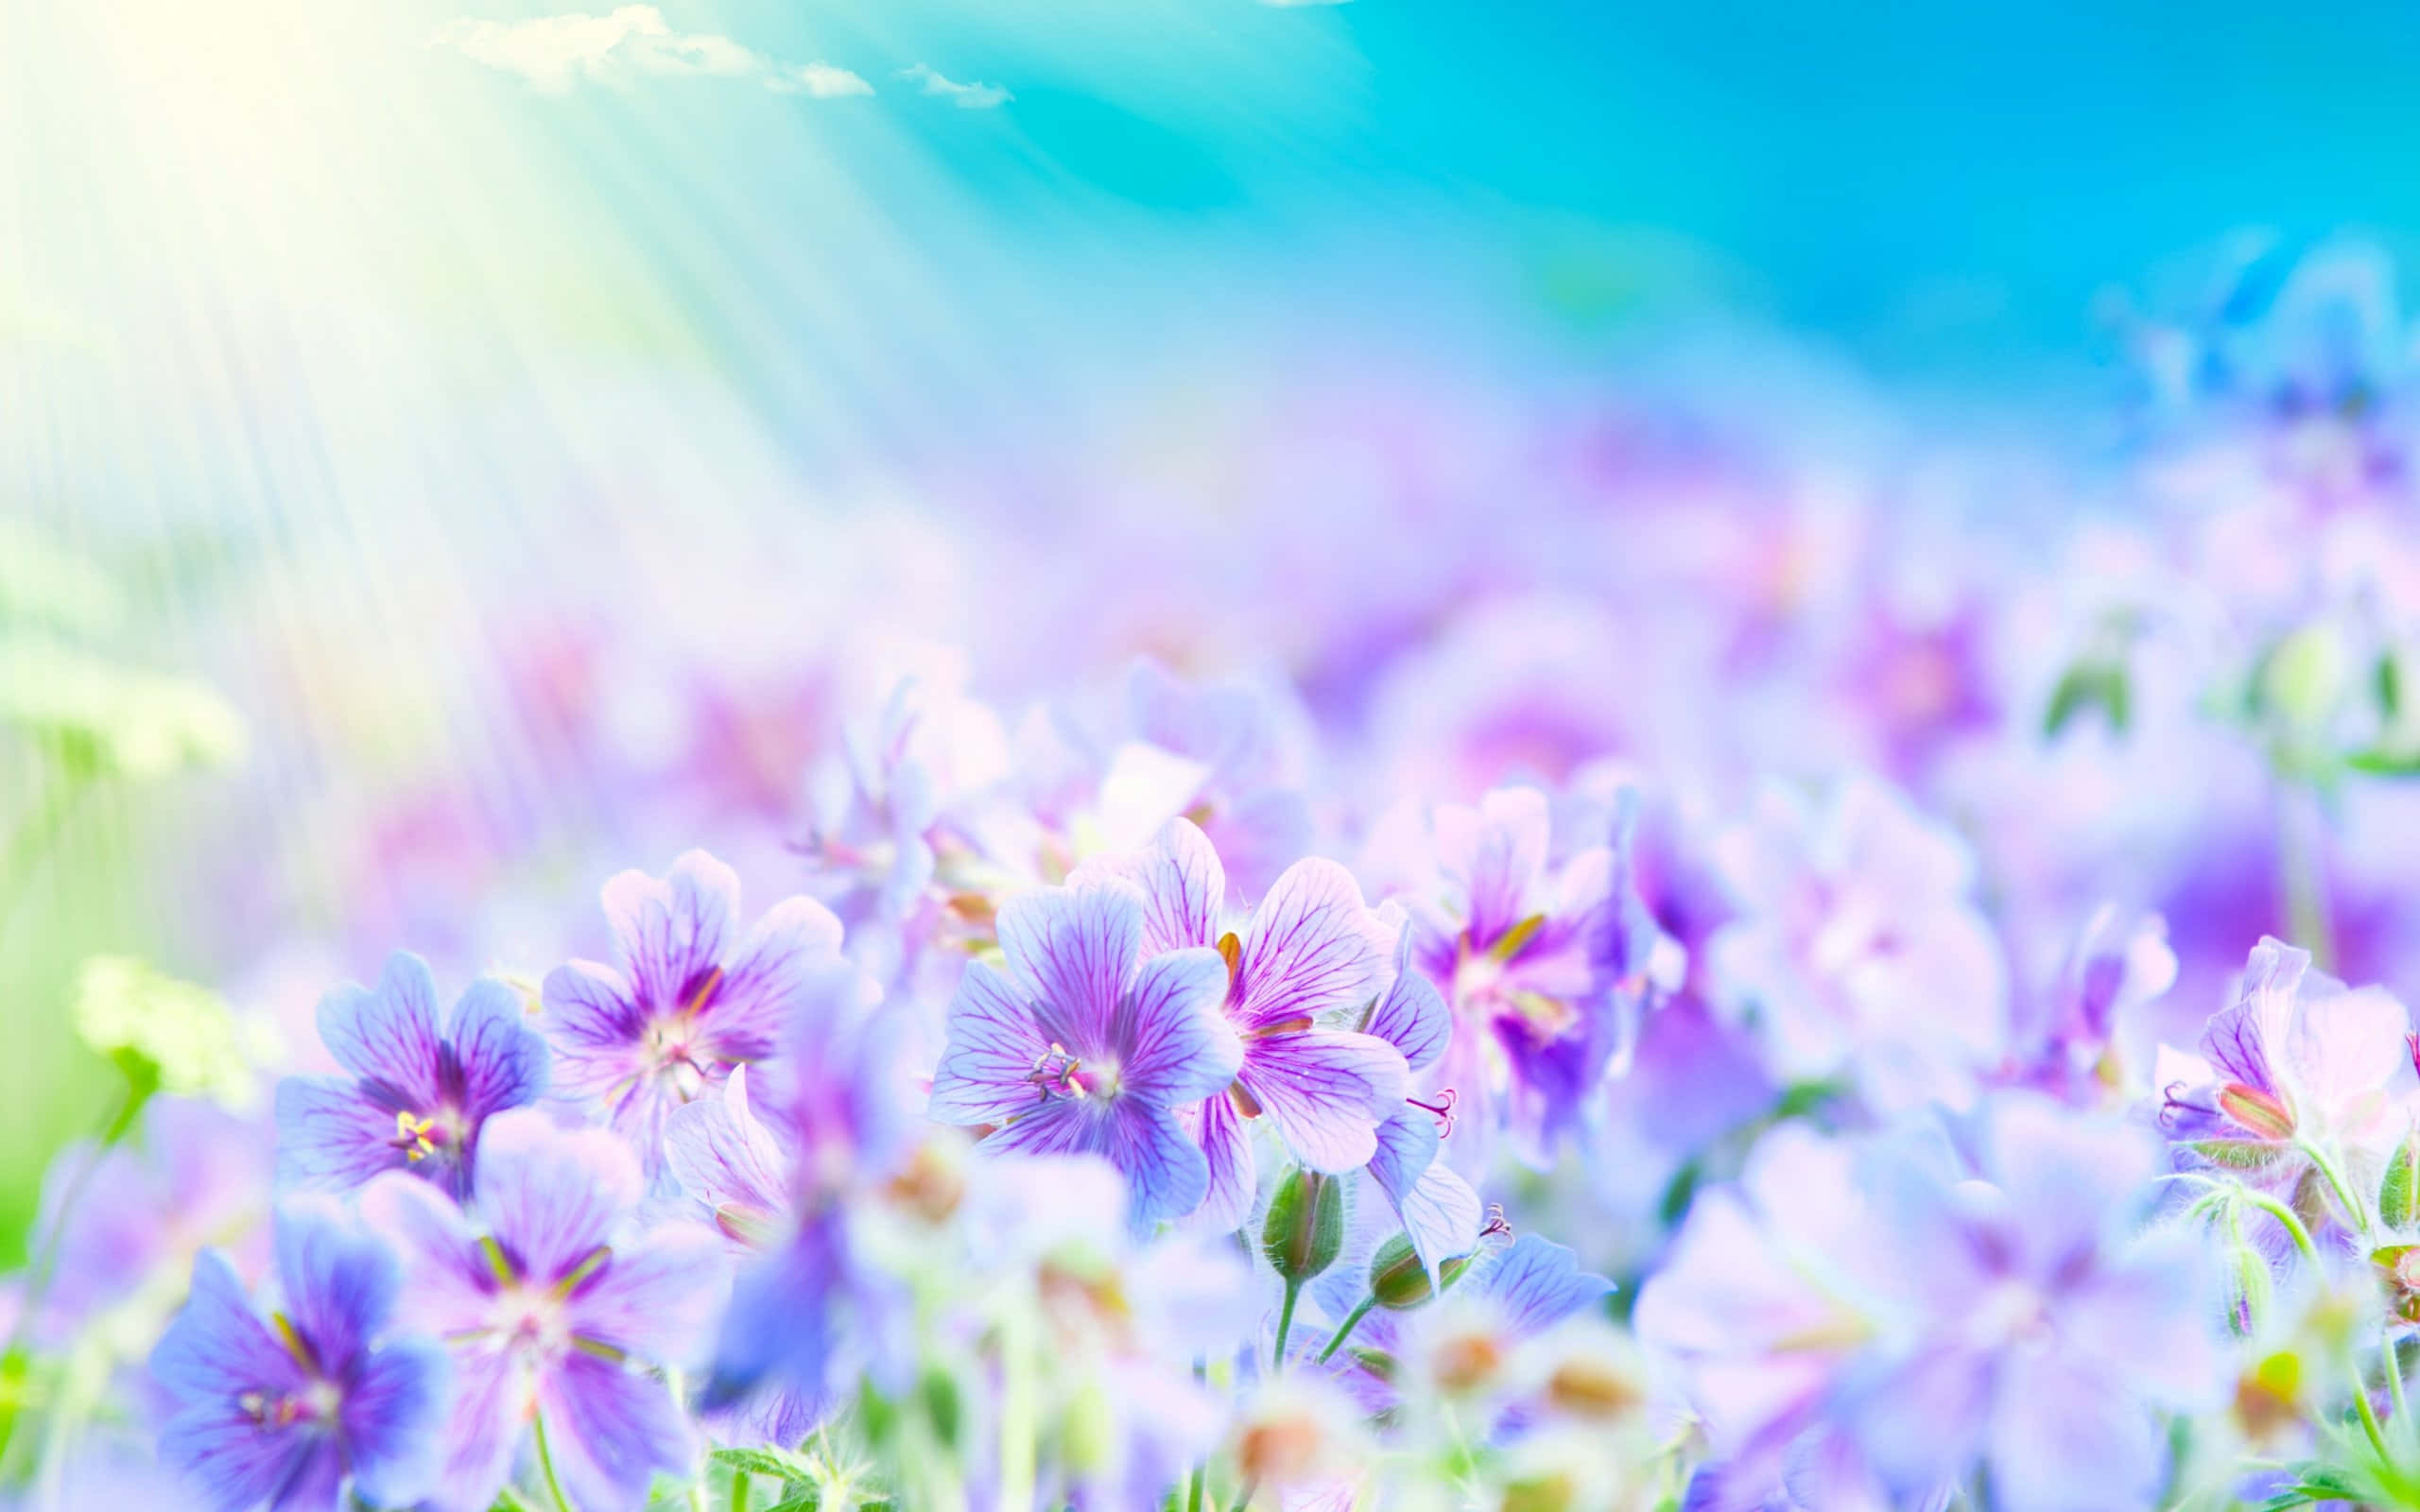 A Field Of Purple Flowers With Sun Rays Shining Through